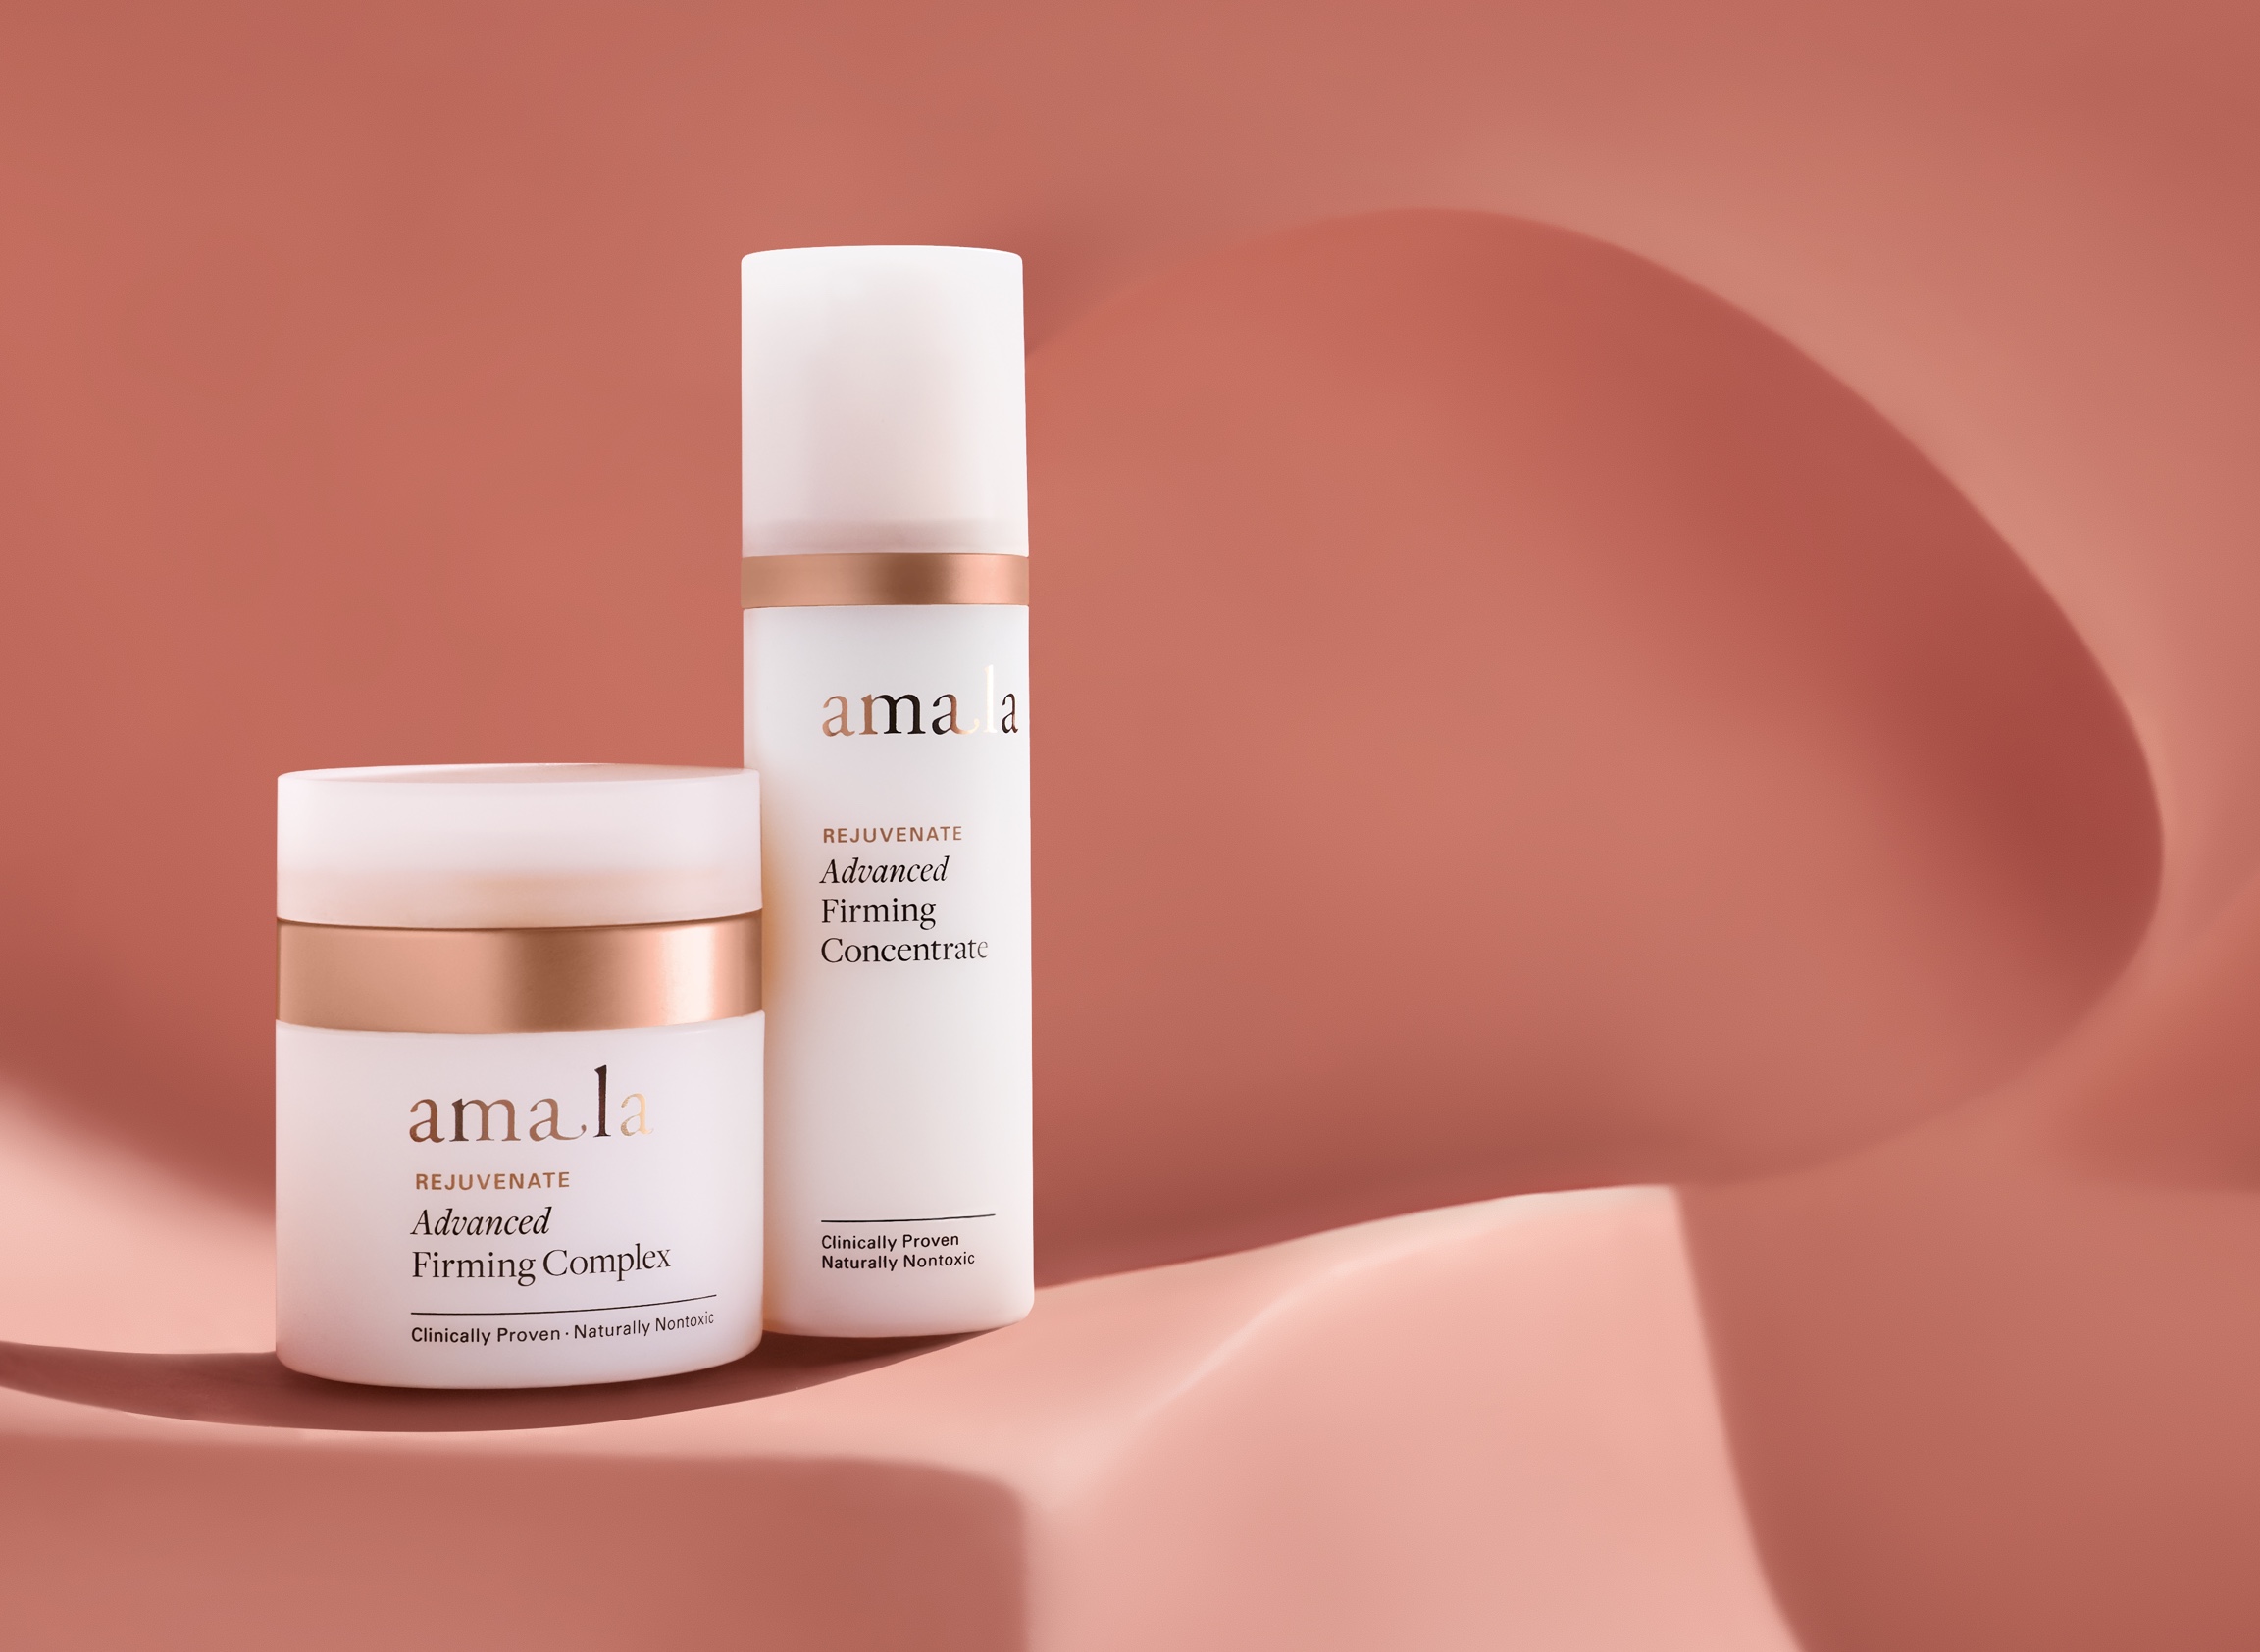 Jars of Amala Advanced Firming Complex and Advanced Firming Concentrate